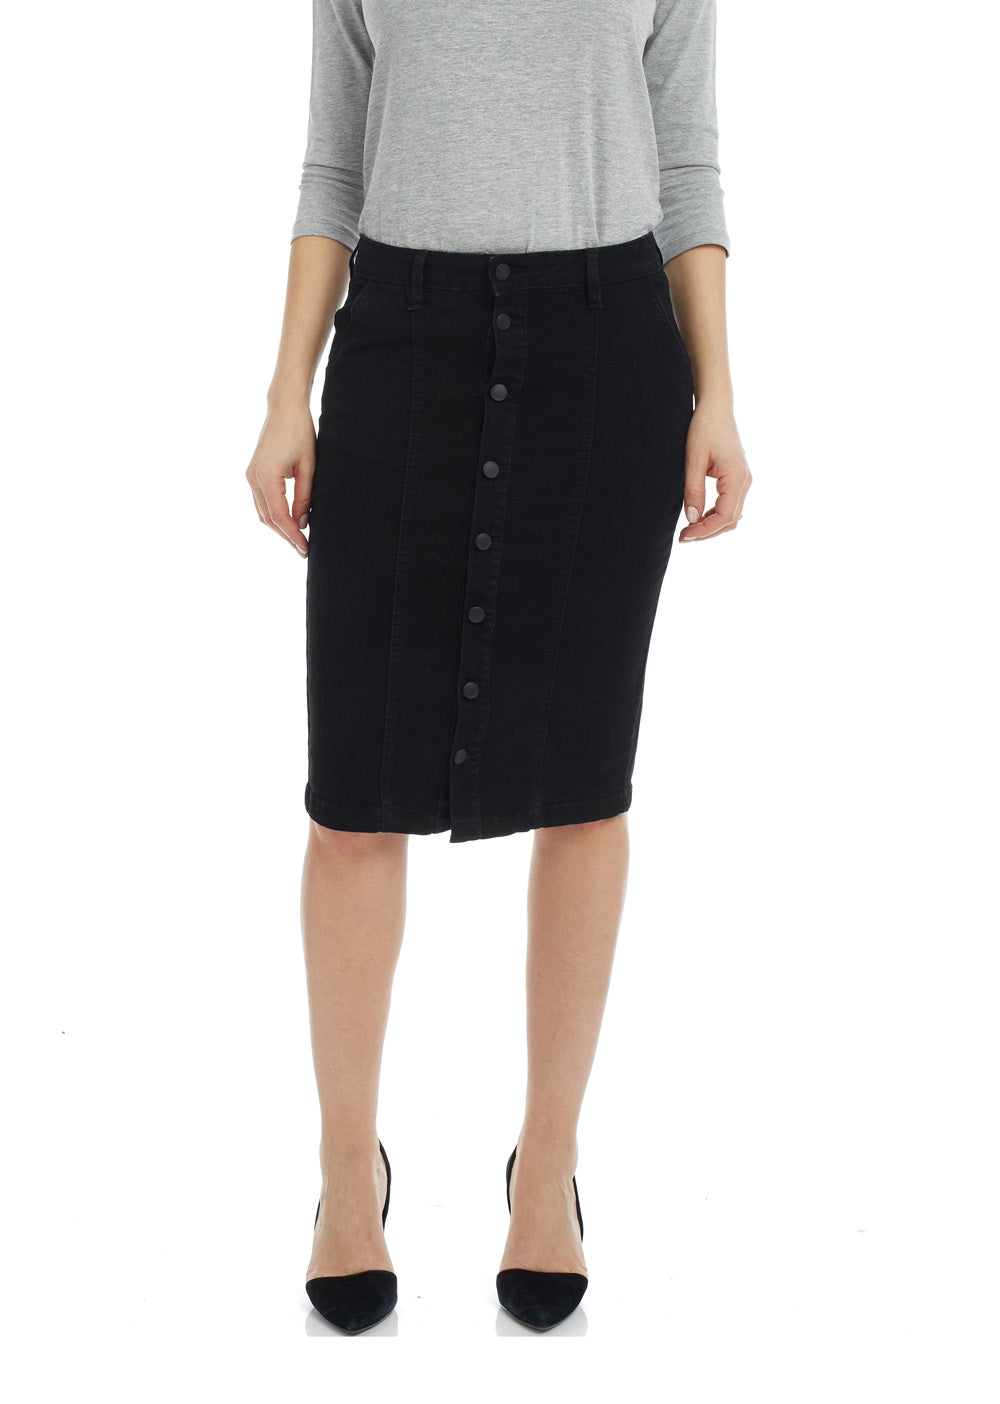 black button down tznius denim jean pencil skirt with pockets and belt loops